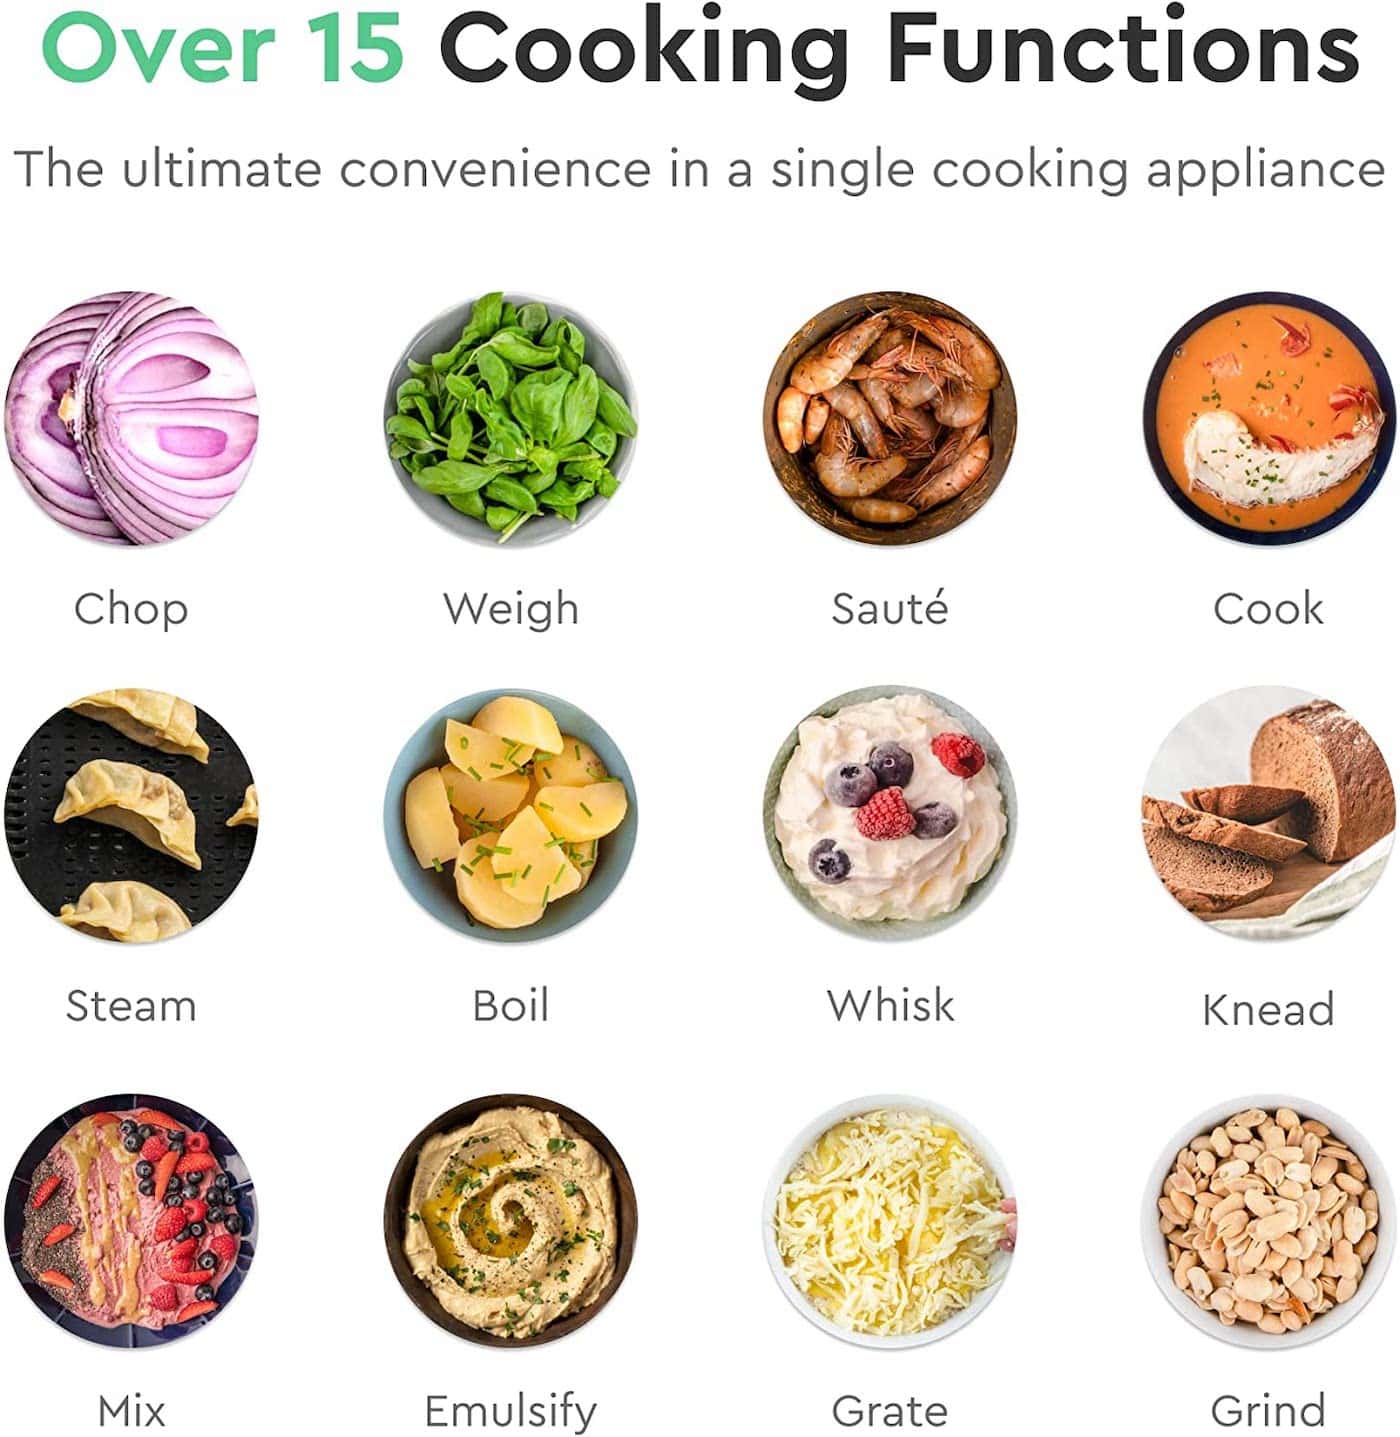 https://www.cleaneatingkitchen.com/wp-content/uploads/2022/12/multo-cooking-functions.jpeg